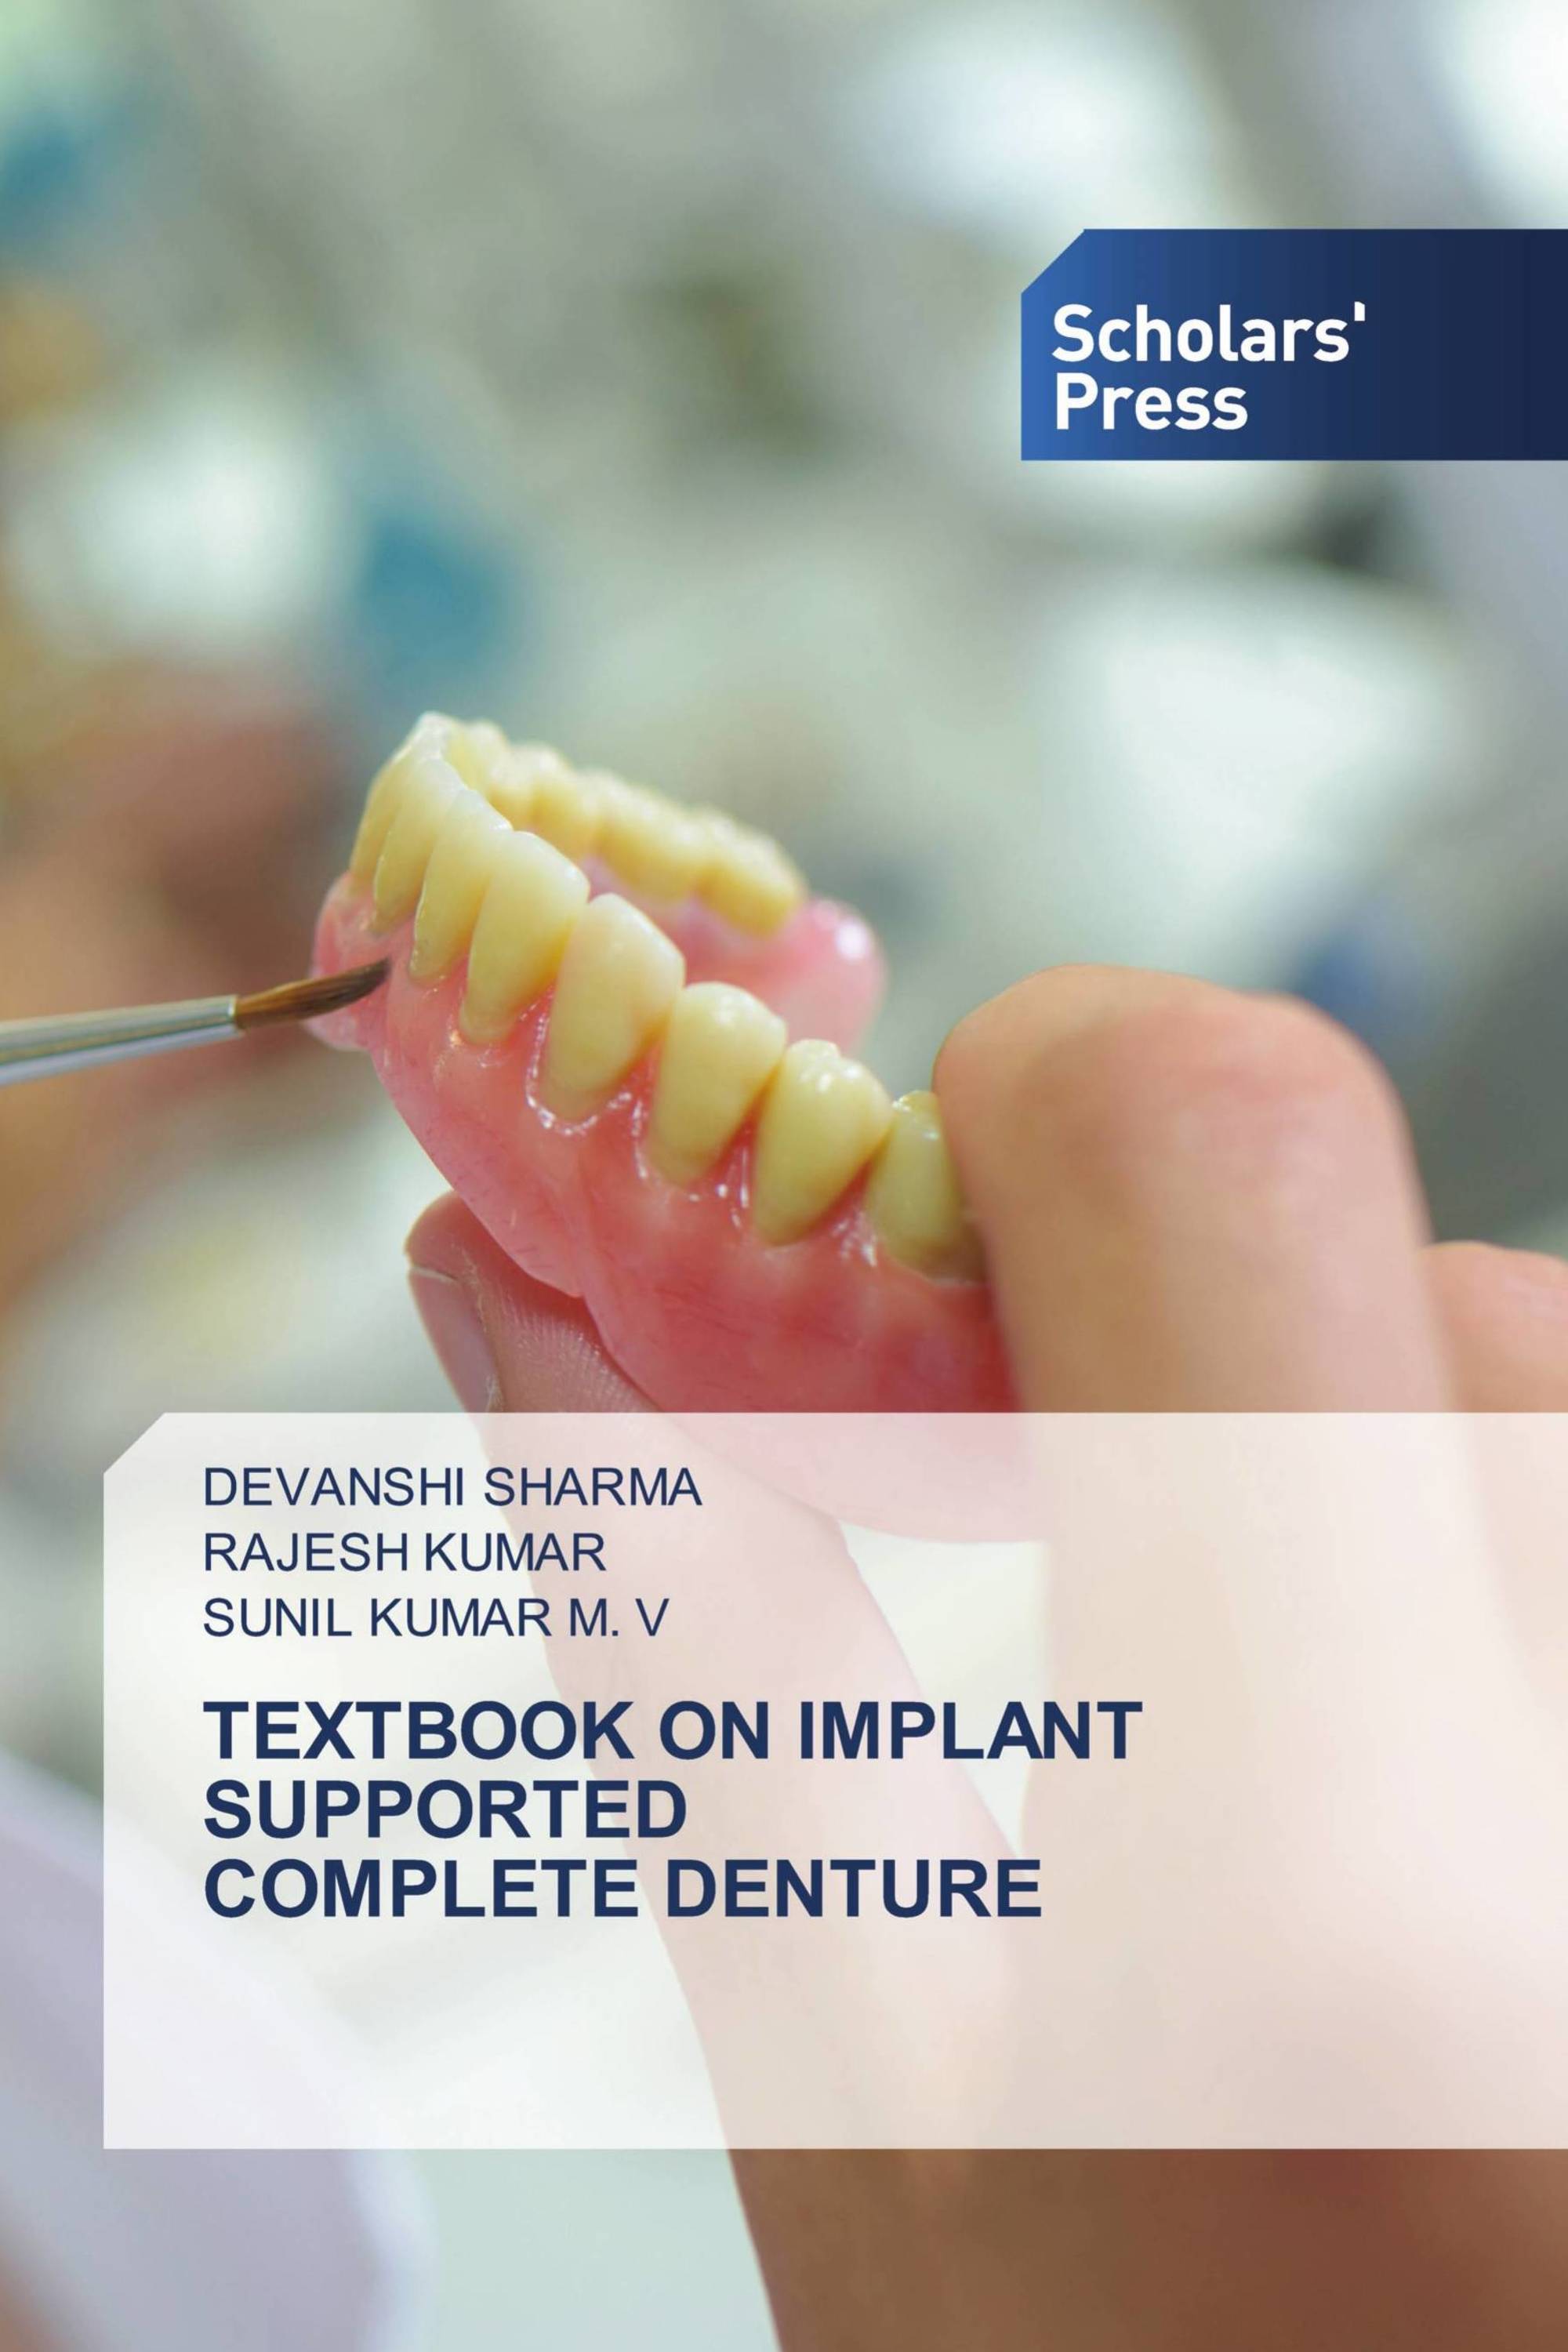 TEXTBOOK ON IMPLANT SUPPORTED COMPLETE DENTURE